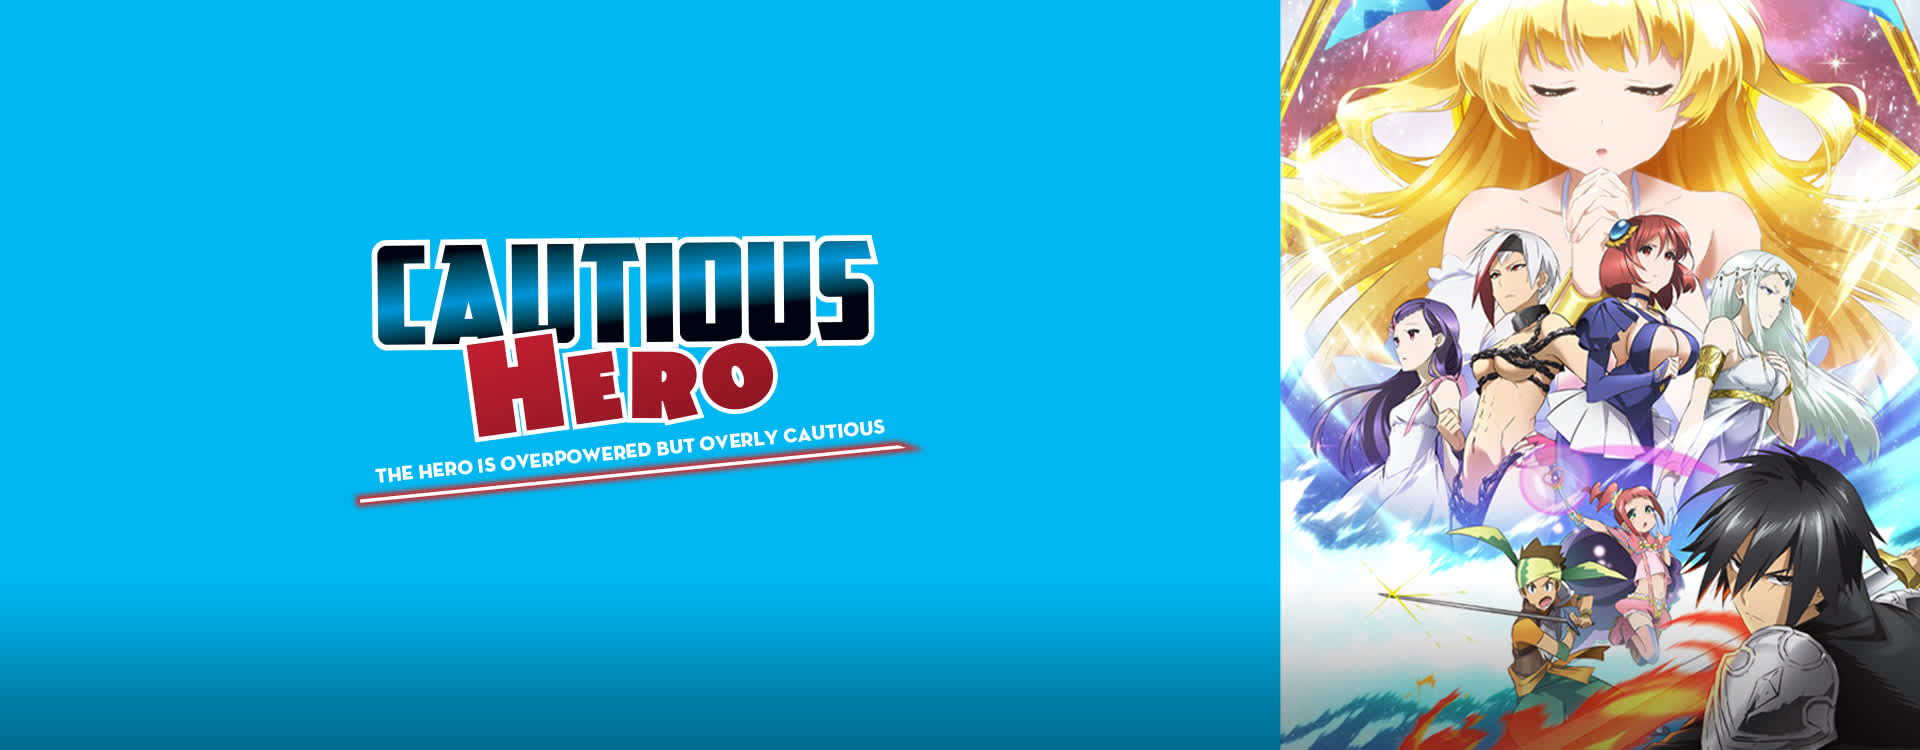 Cautious Hero: The Hero Is Overpowered but Overly Cautious Recap